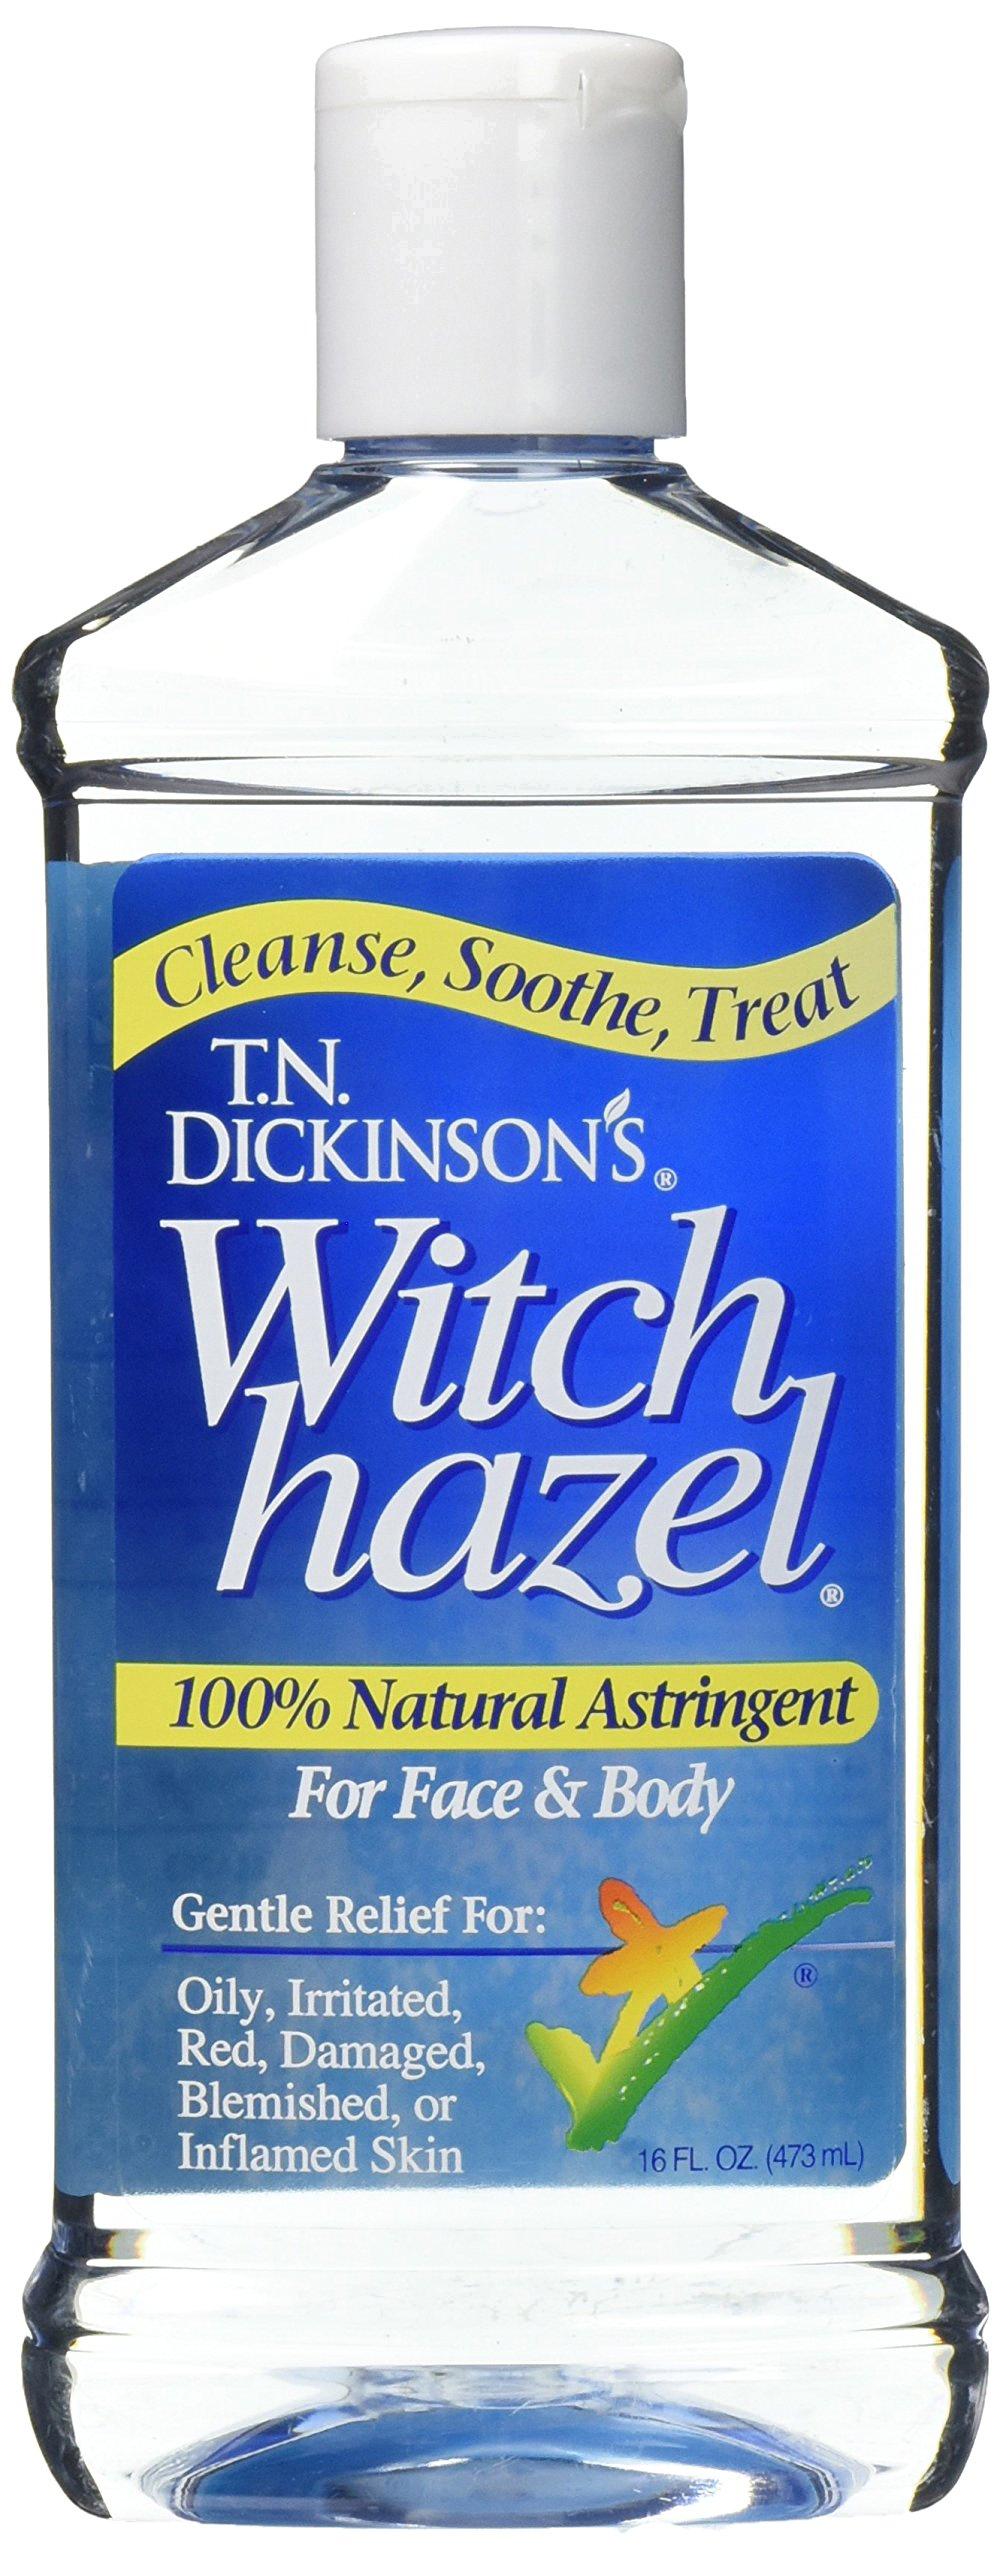 can witch hazel be used on vag